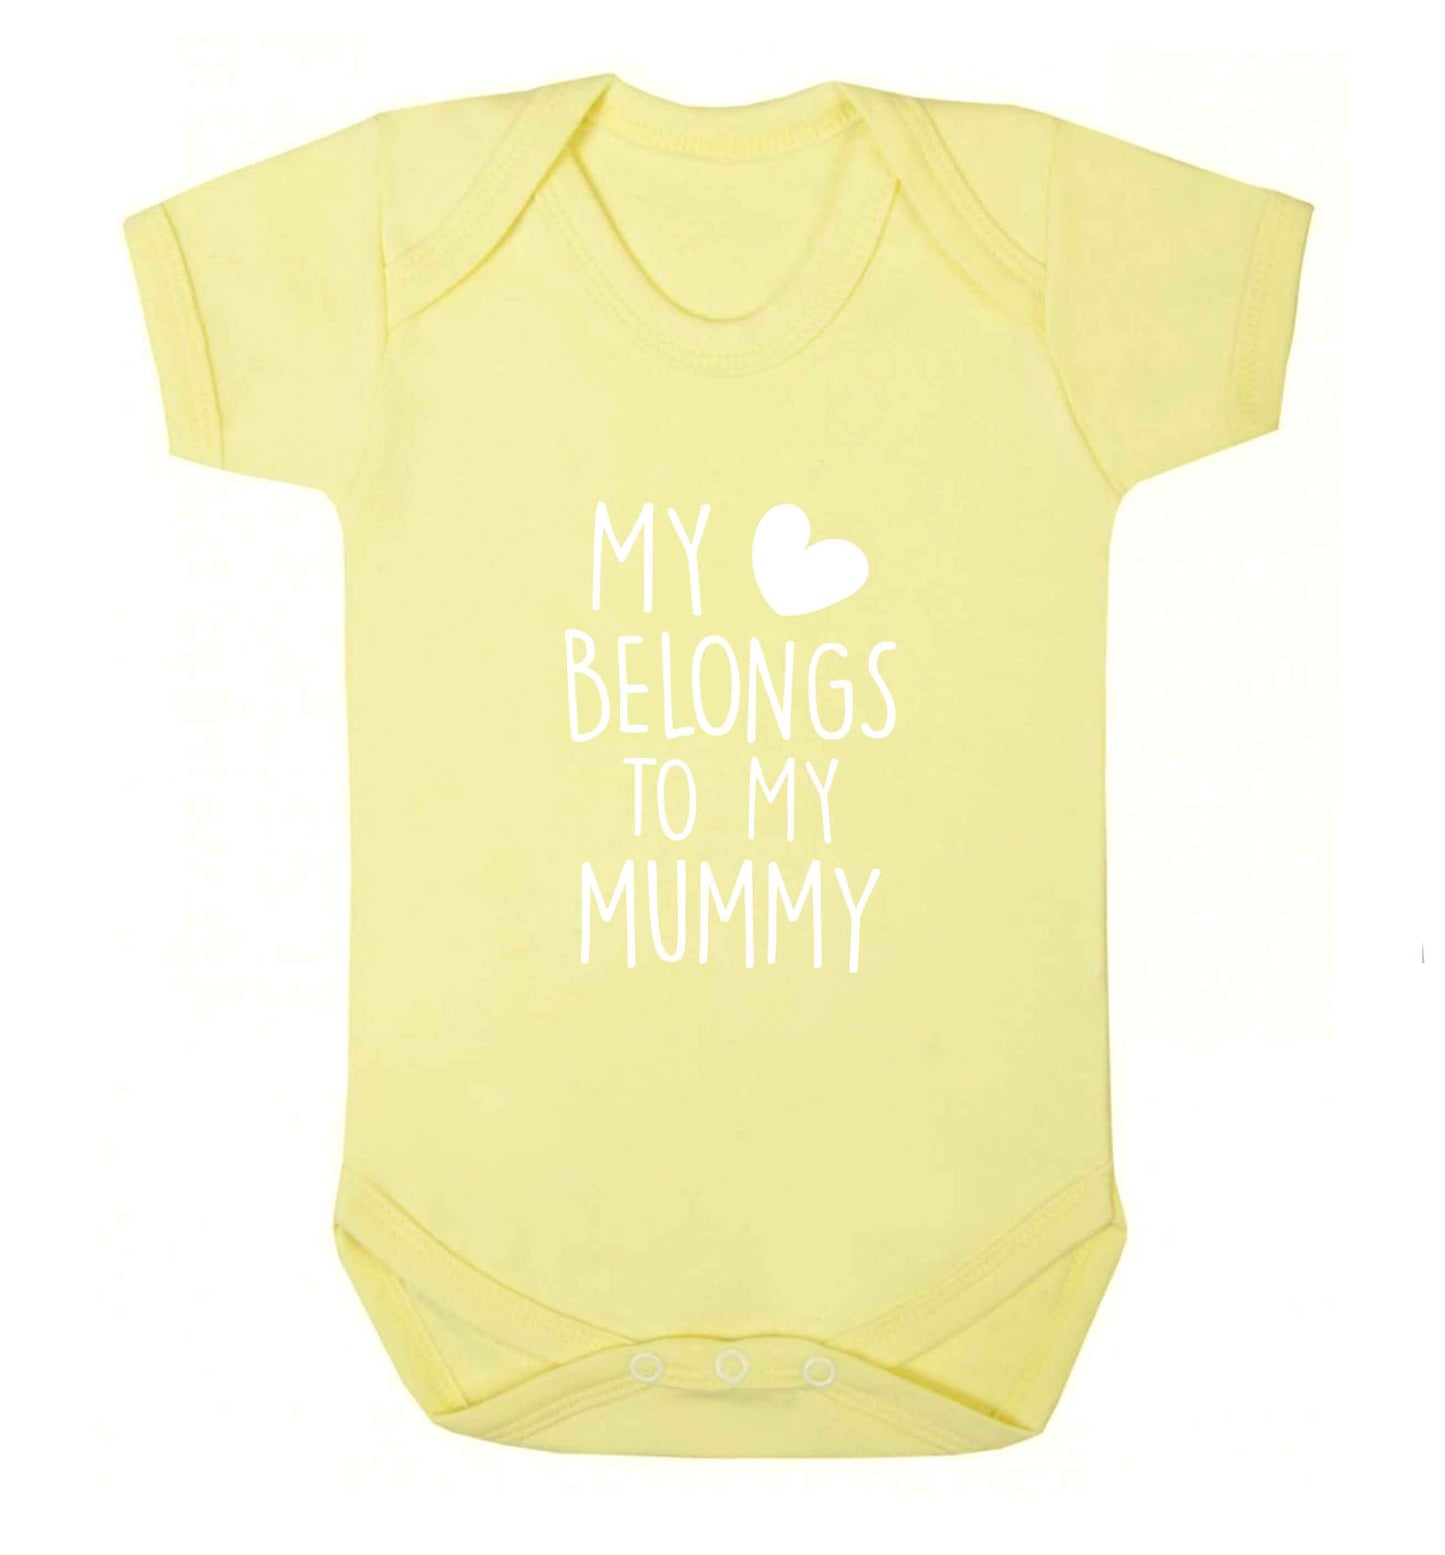 My heart belongs to my mummy baby vest pale yellow 18-24 months